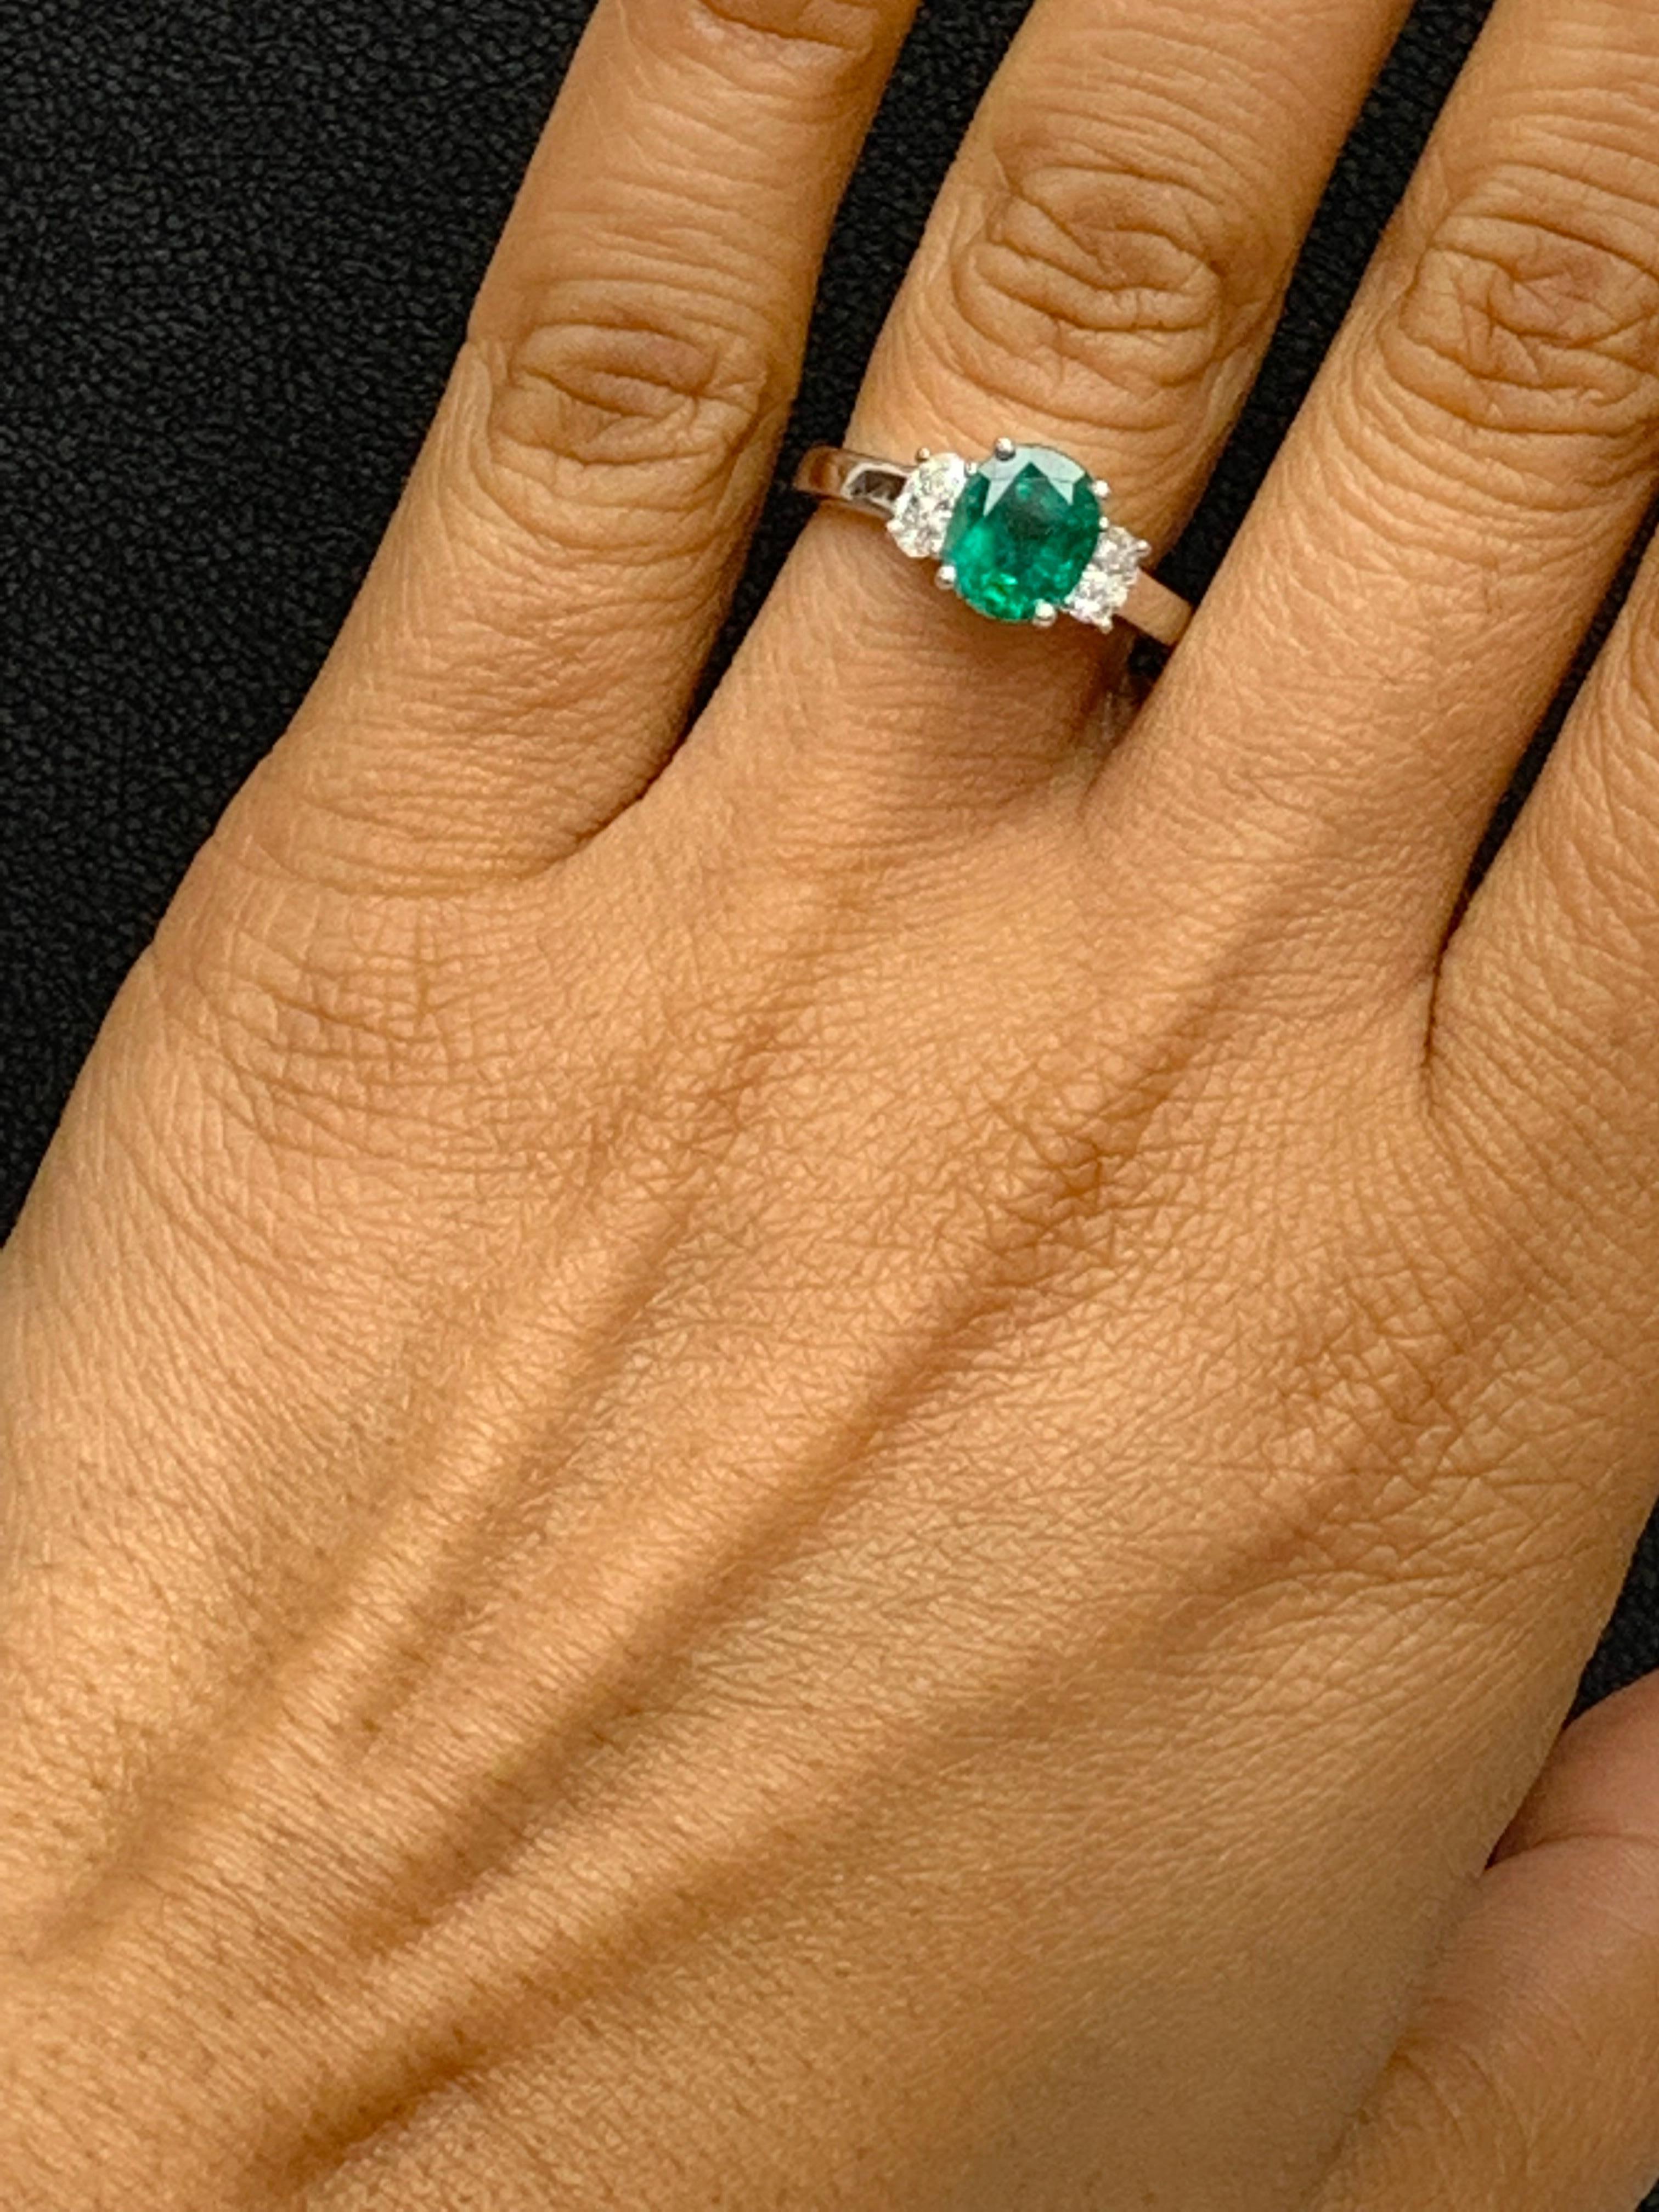 Women's 1.97 Carat Oval Cut Emerald & Diamond 3 Stone Engagement Ring in 18k White Gold For Sale